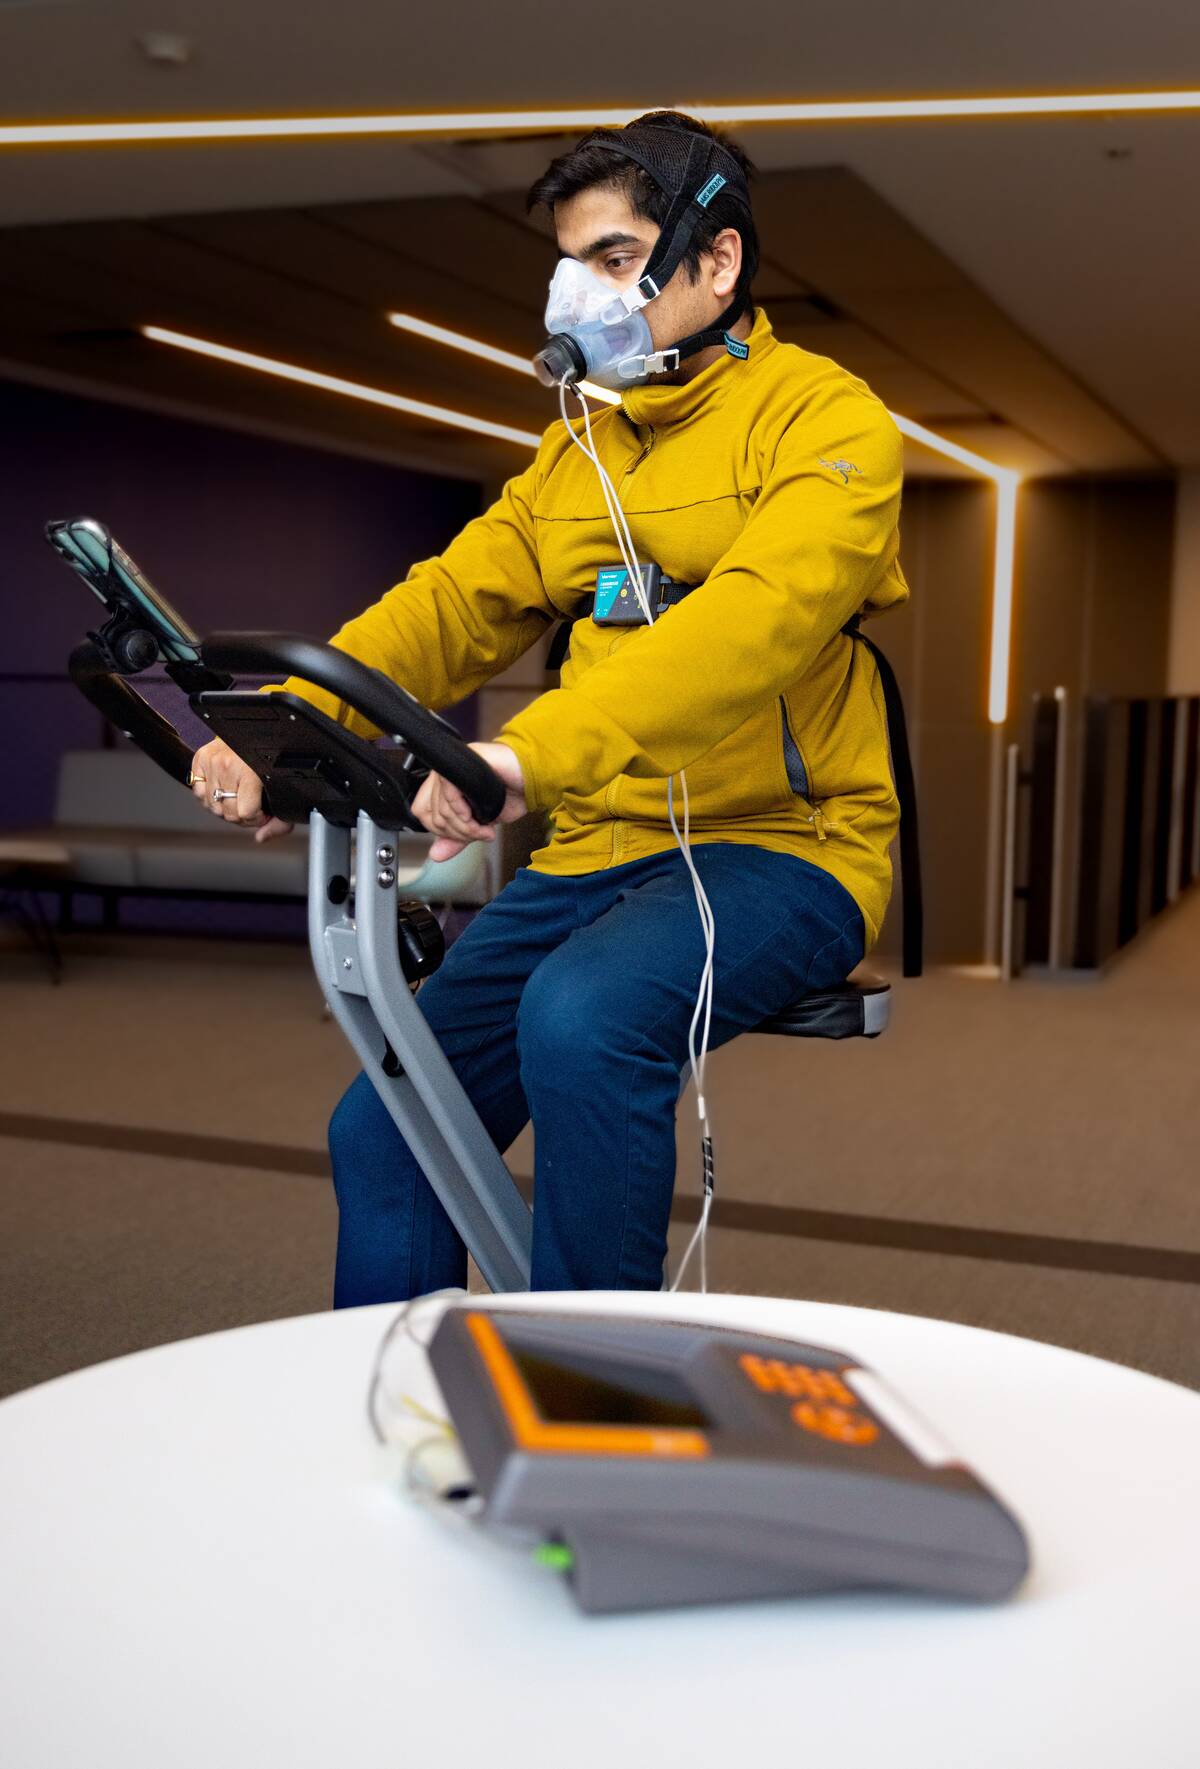 A person on a stationary bike.